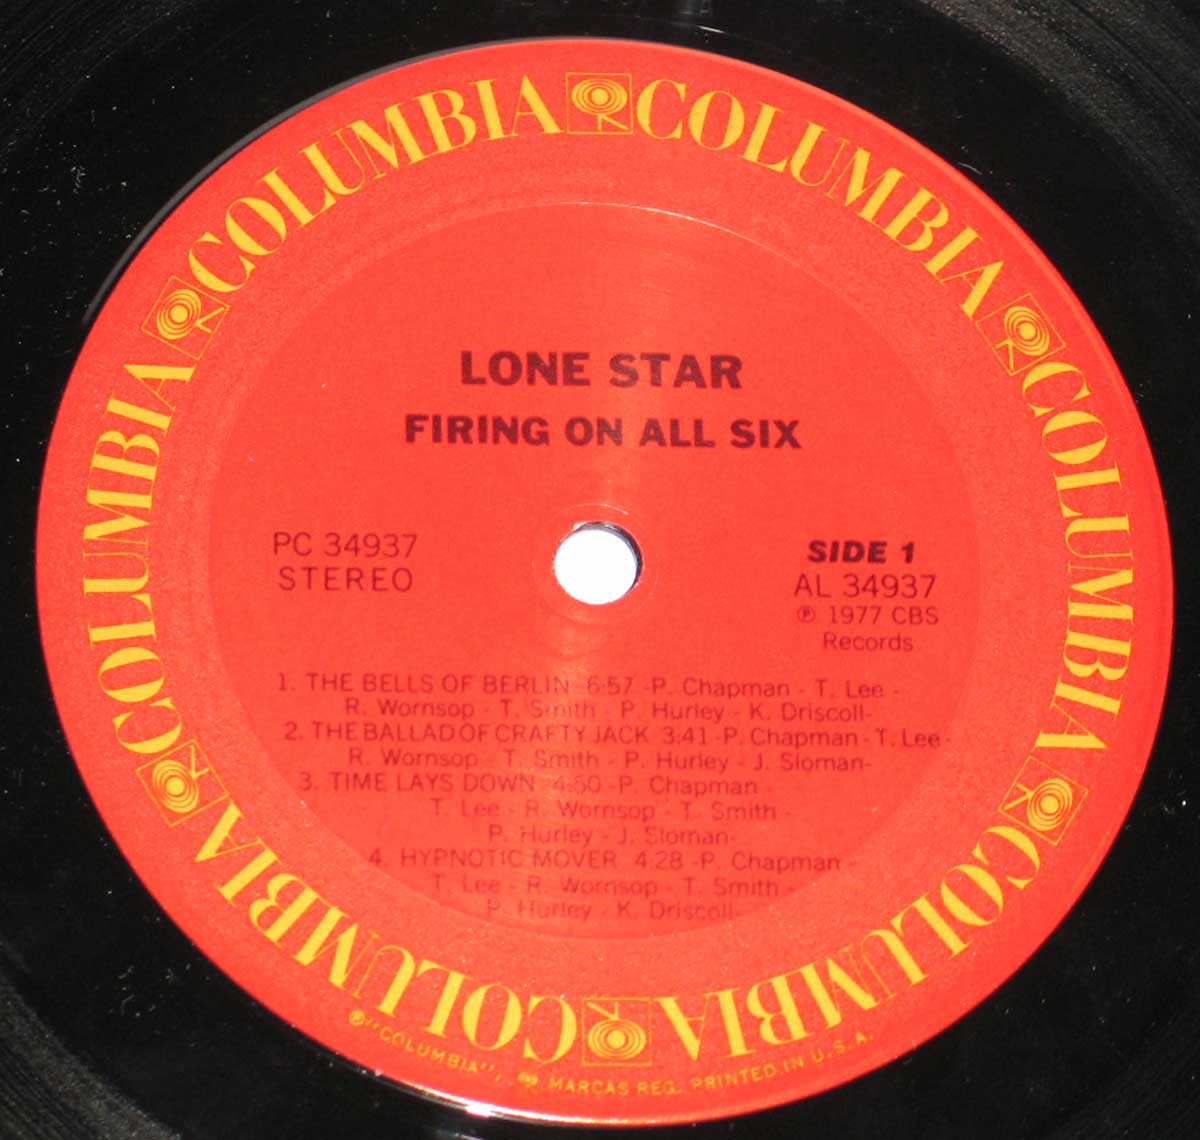 Close-up Photo of "Firing on all Six" Record Label  